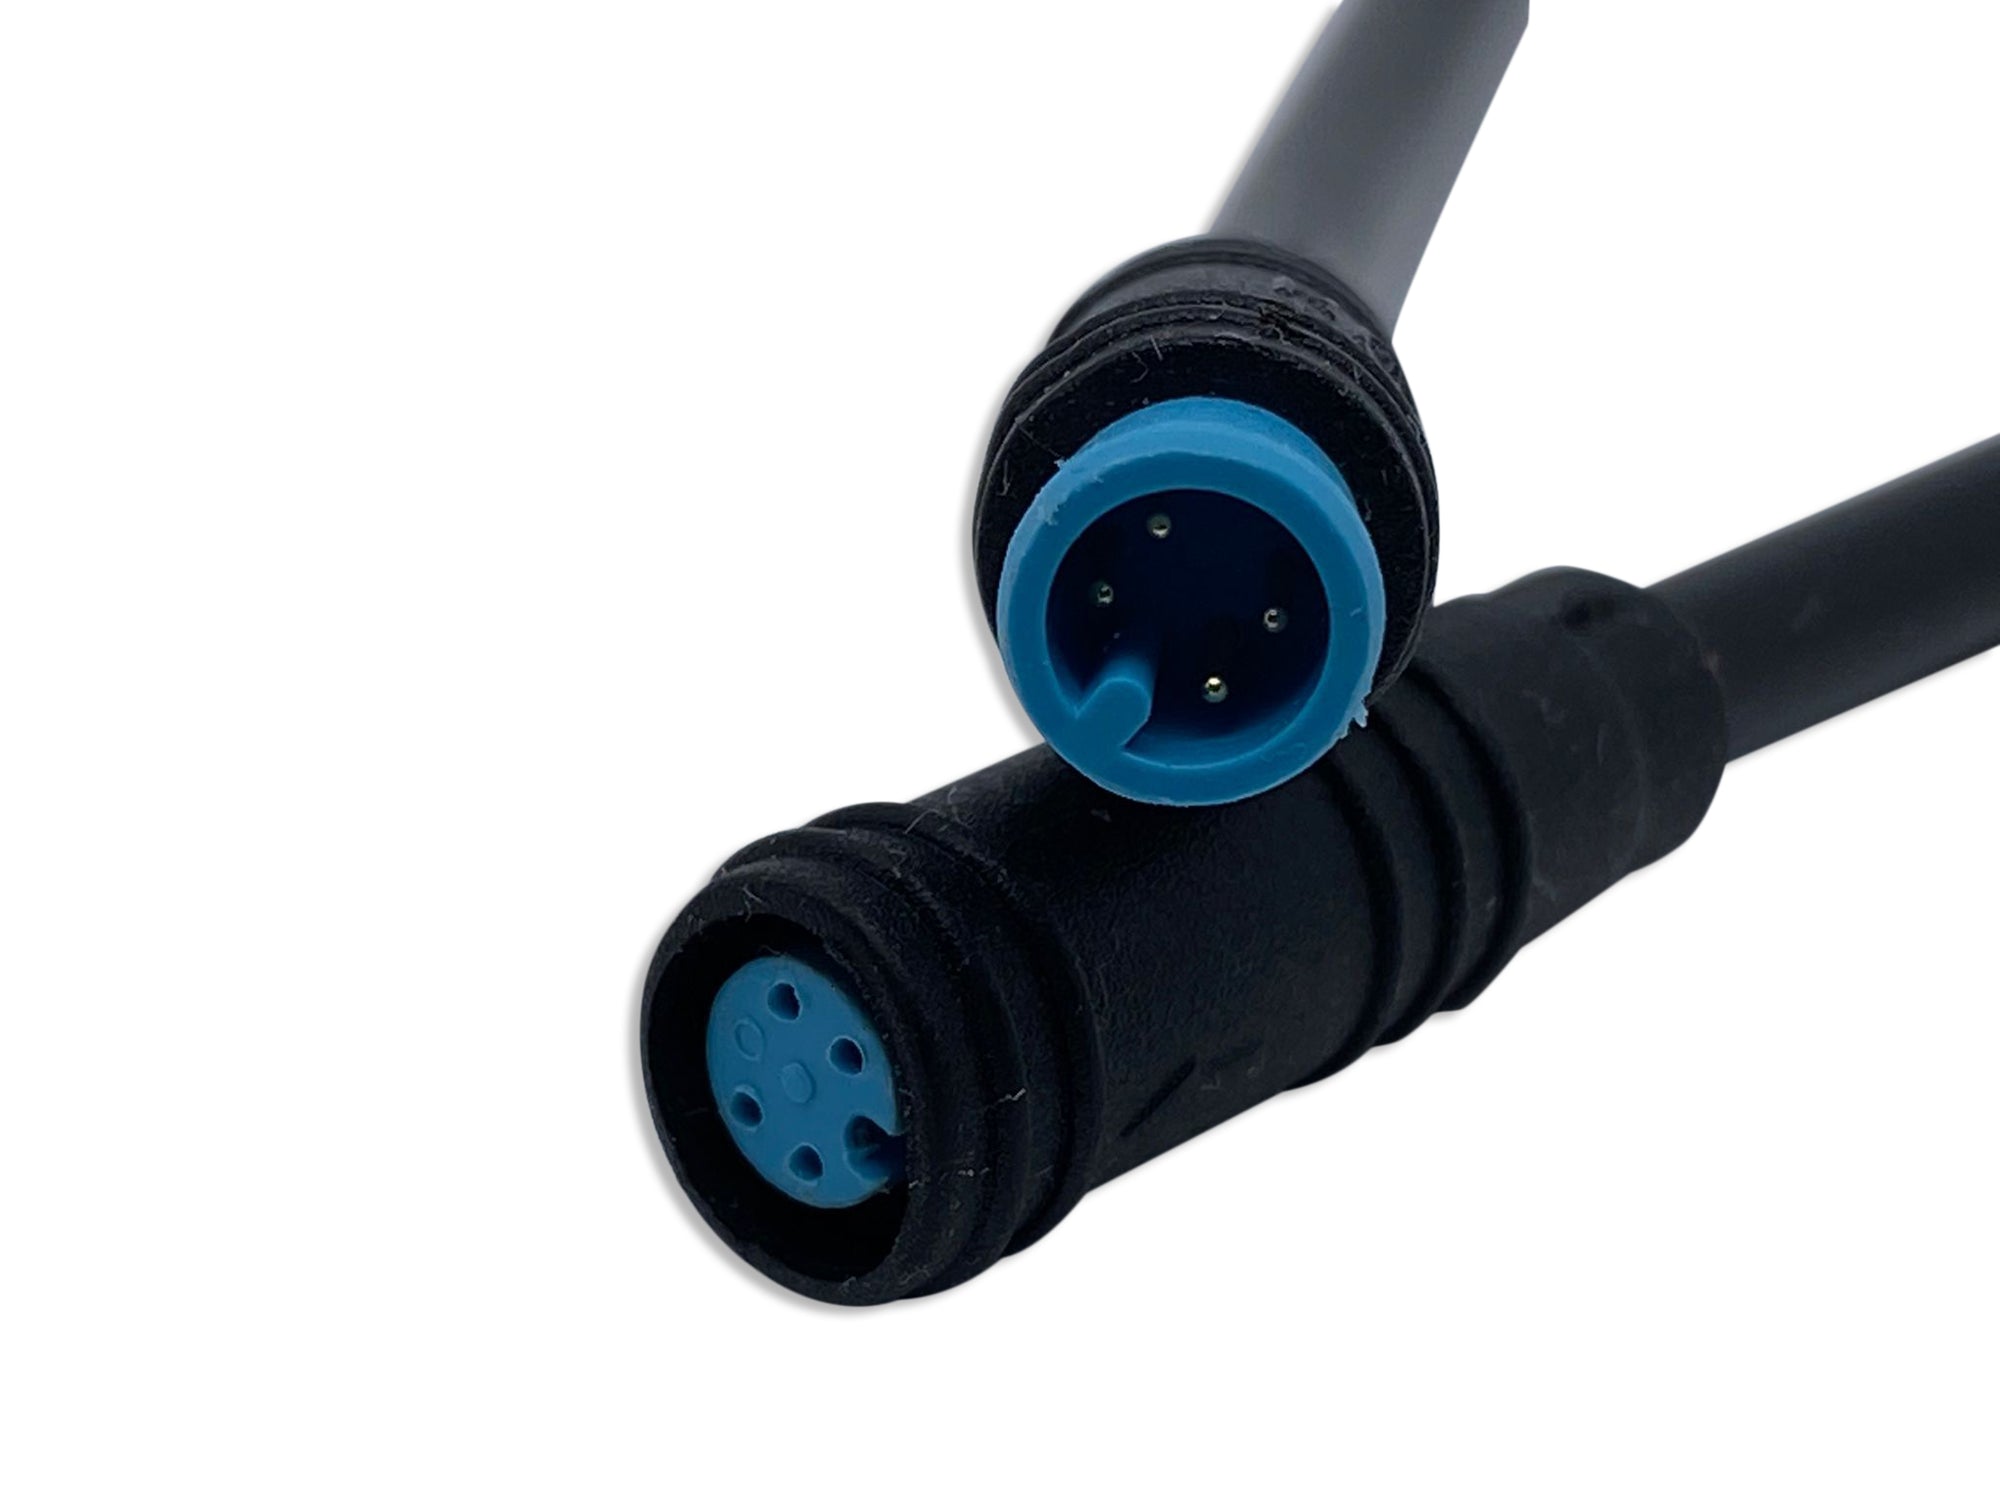 M7 Small PVC 4 Pin IP65 Mini Male and Female Waterproof Cable Connector Plug for Ninebot Kick Scooters